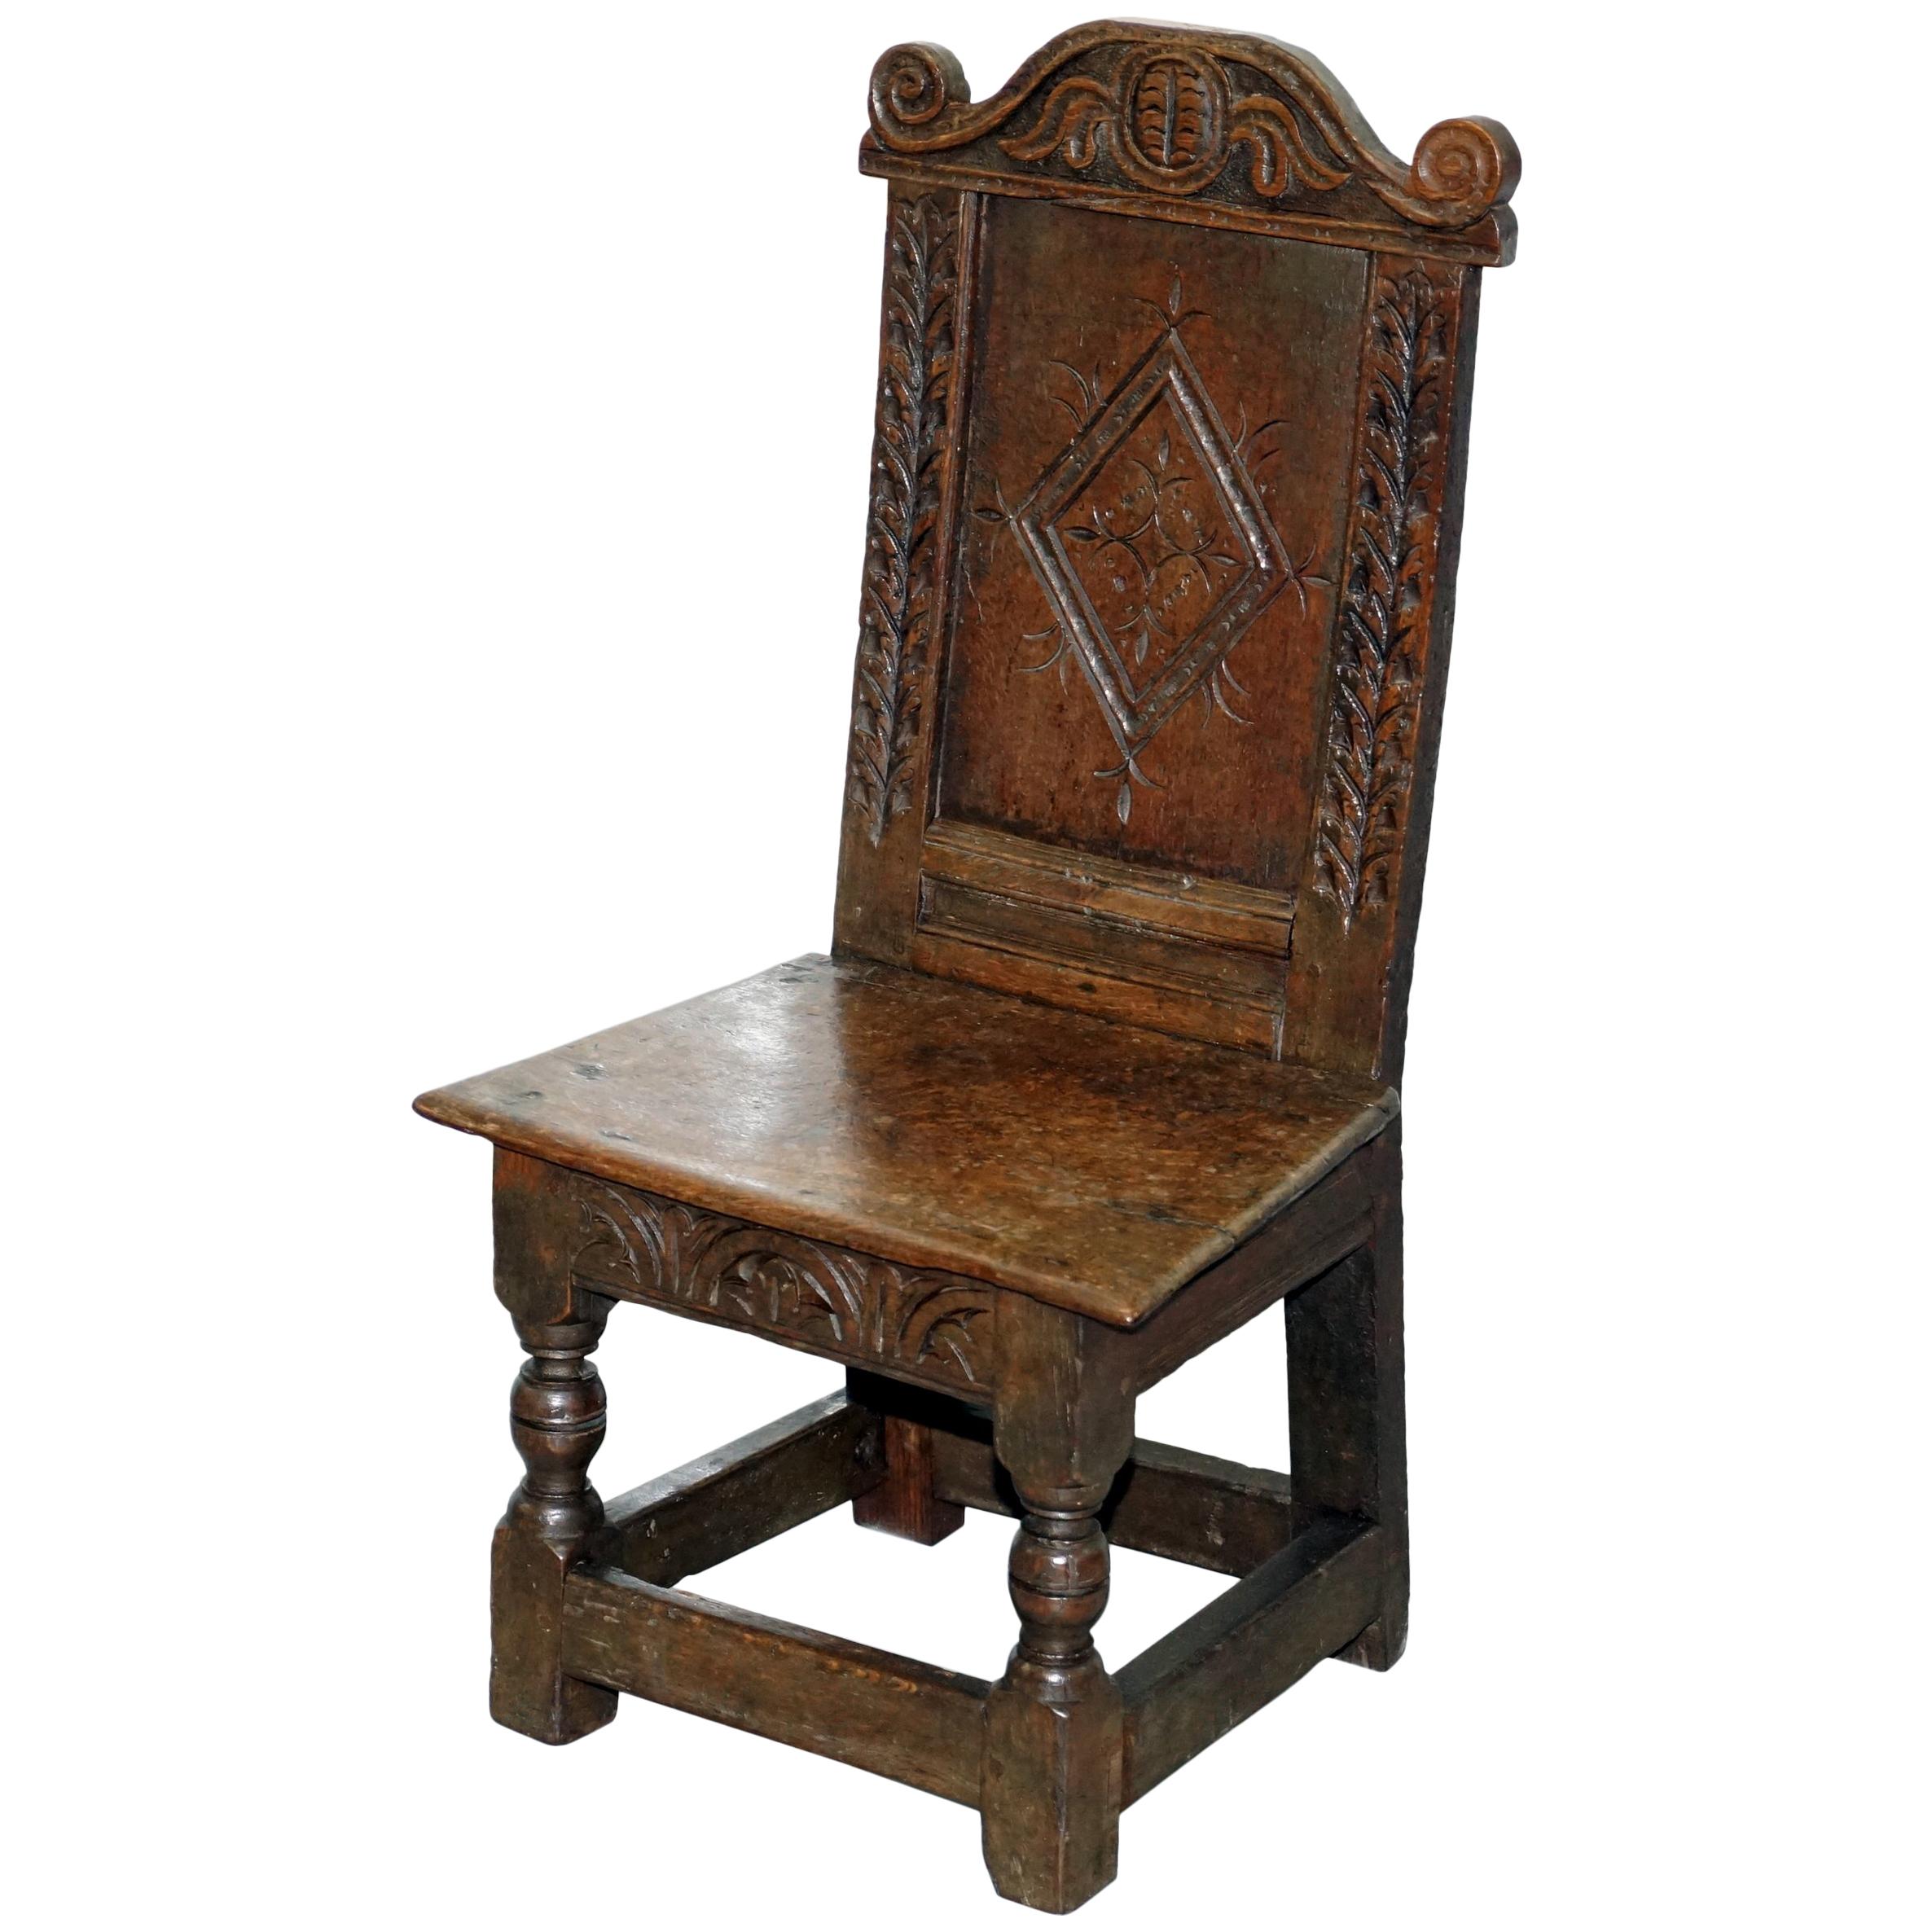 Rare circa 1760 Fruit Wood Chair Nicely Carved Quite Small 18th Century Example For Sale